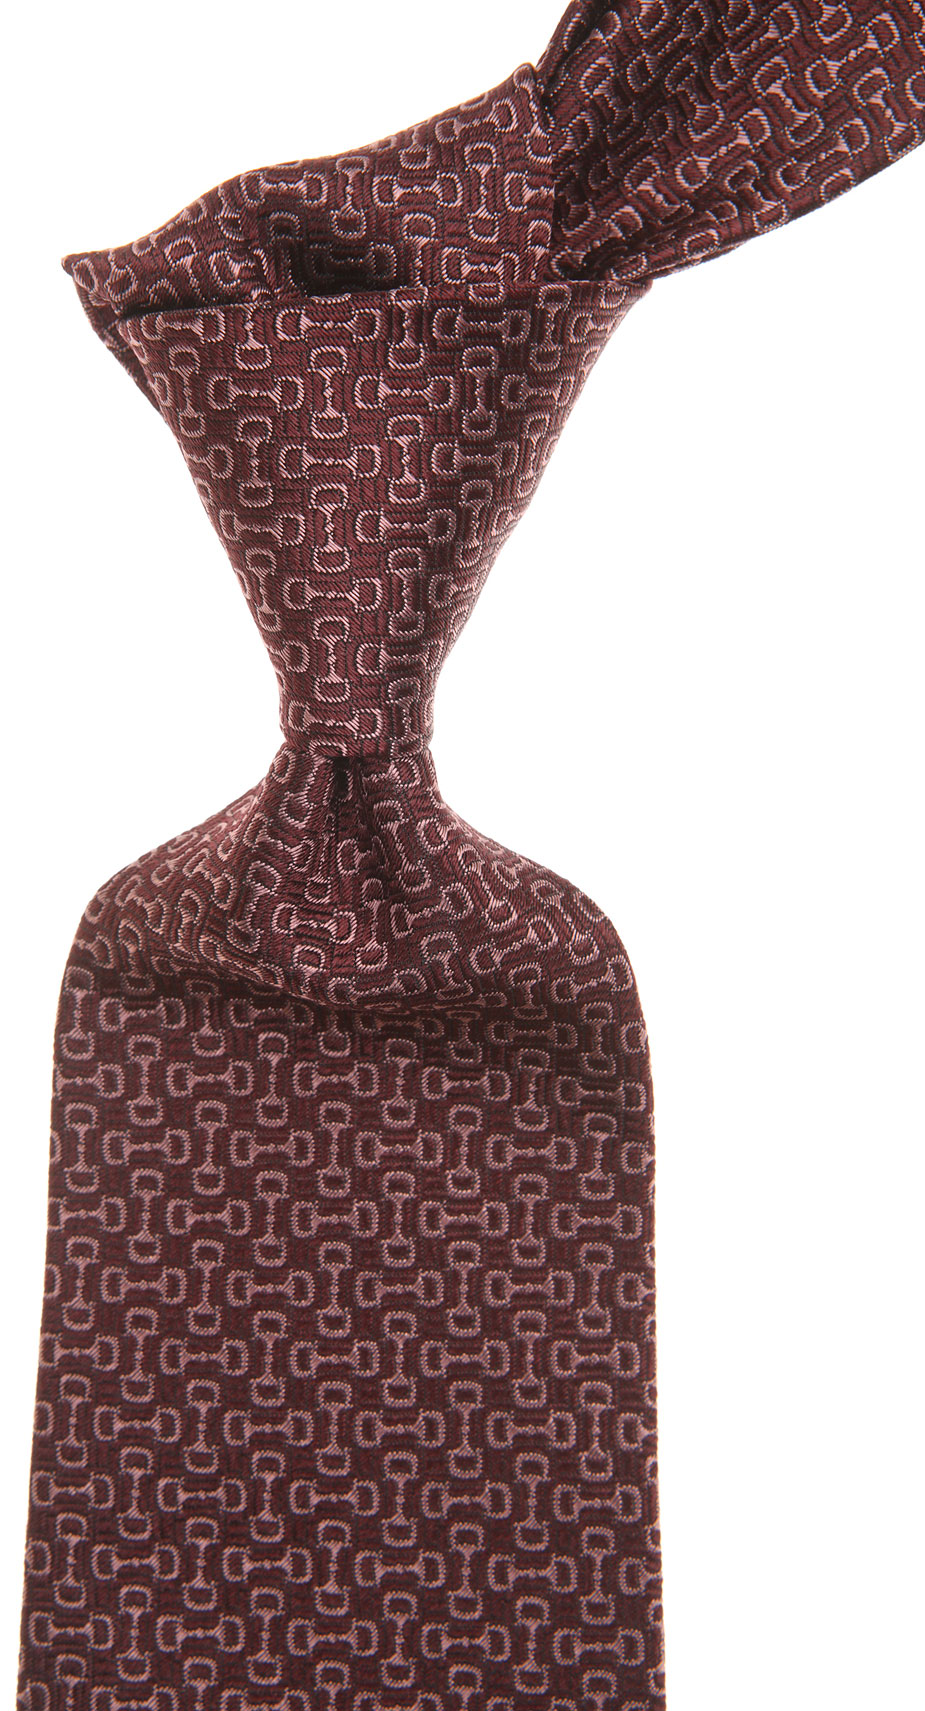 Ties Gucci, Style code: